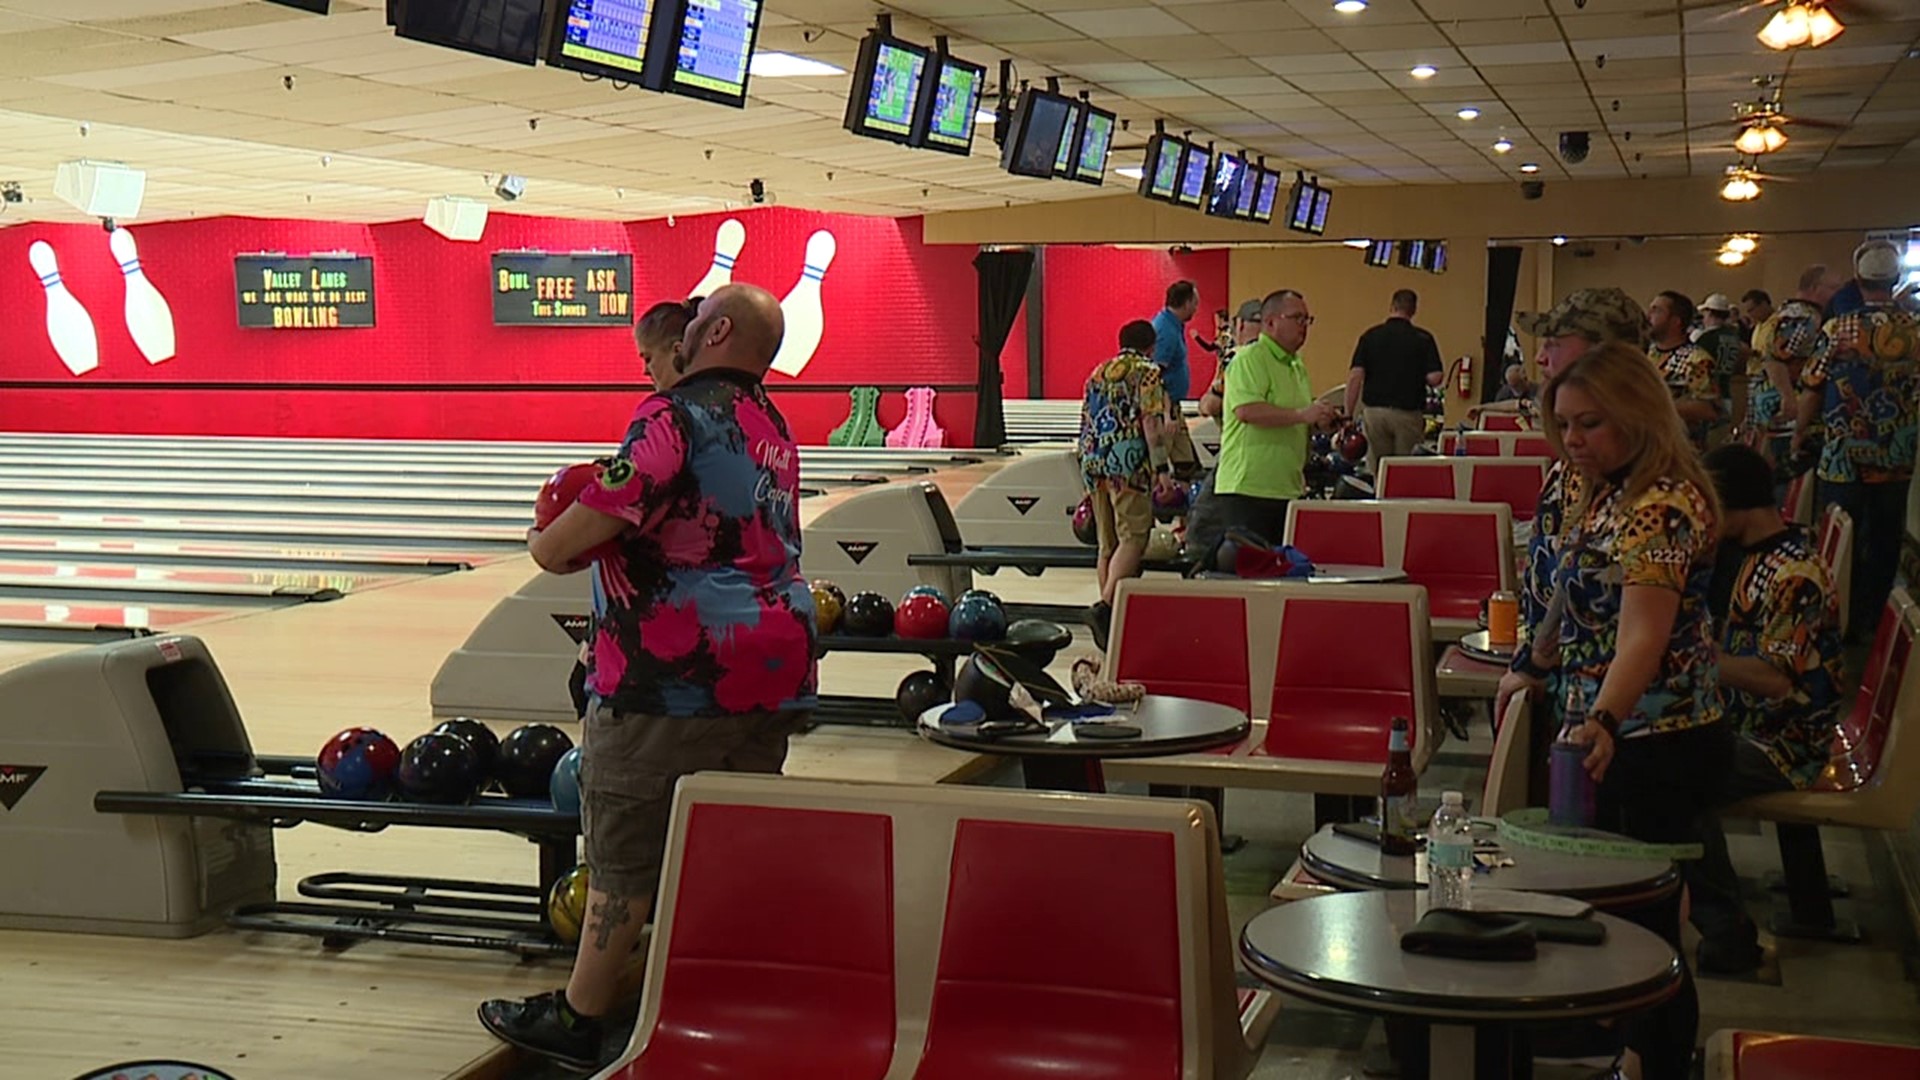 Valley Bowling Lanes held the event at 10 a.m. on Sunday.